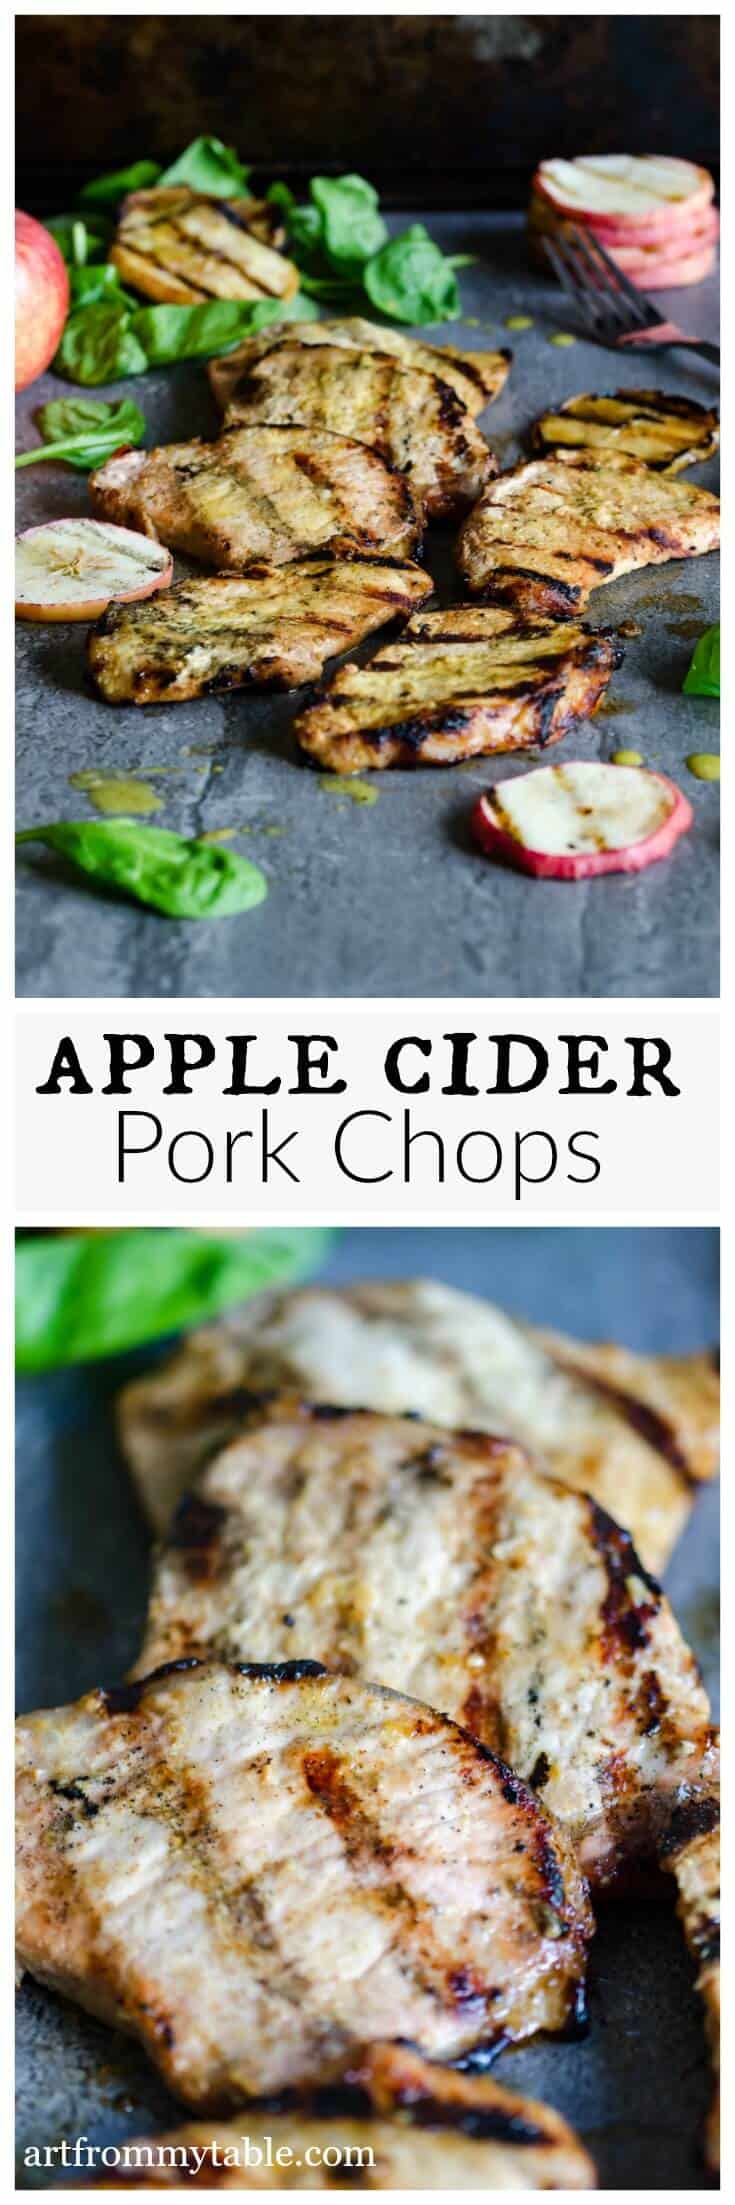 apple cider grilled pork chops with grilled apples and spinach via @artfrommytable